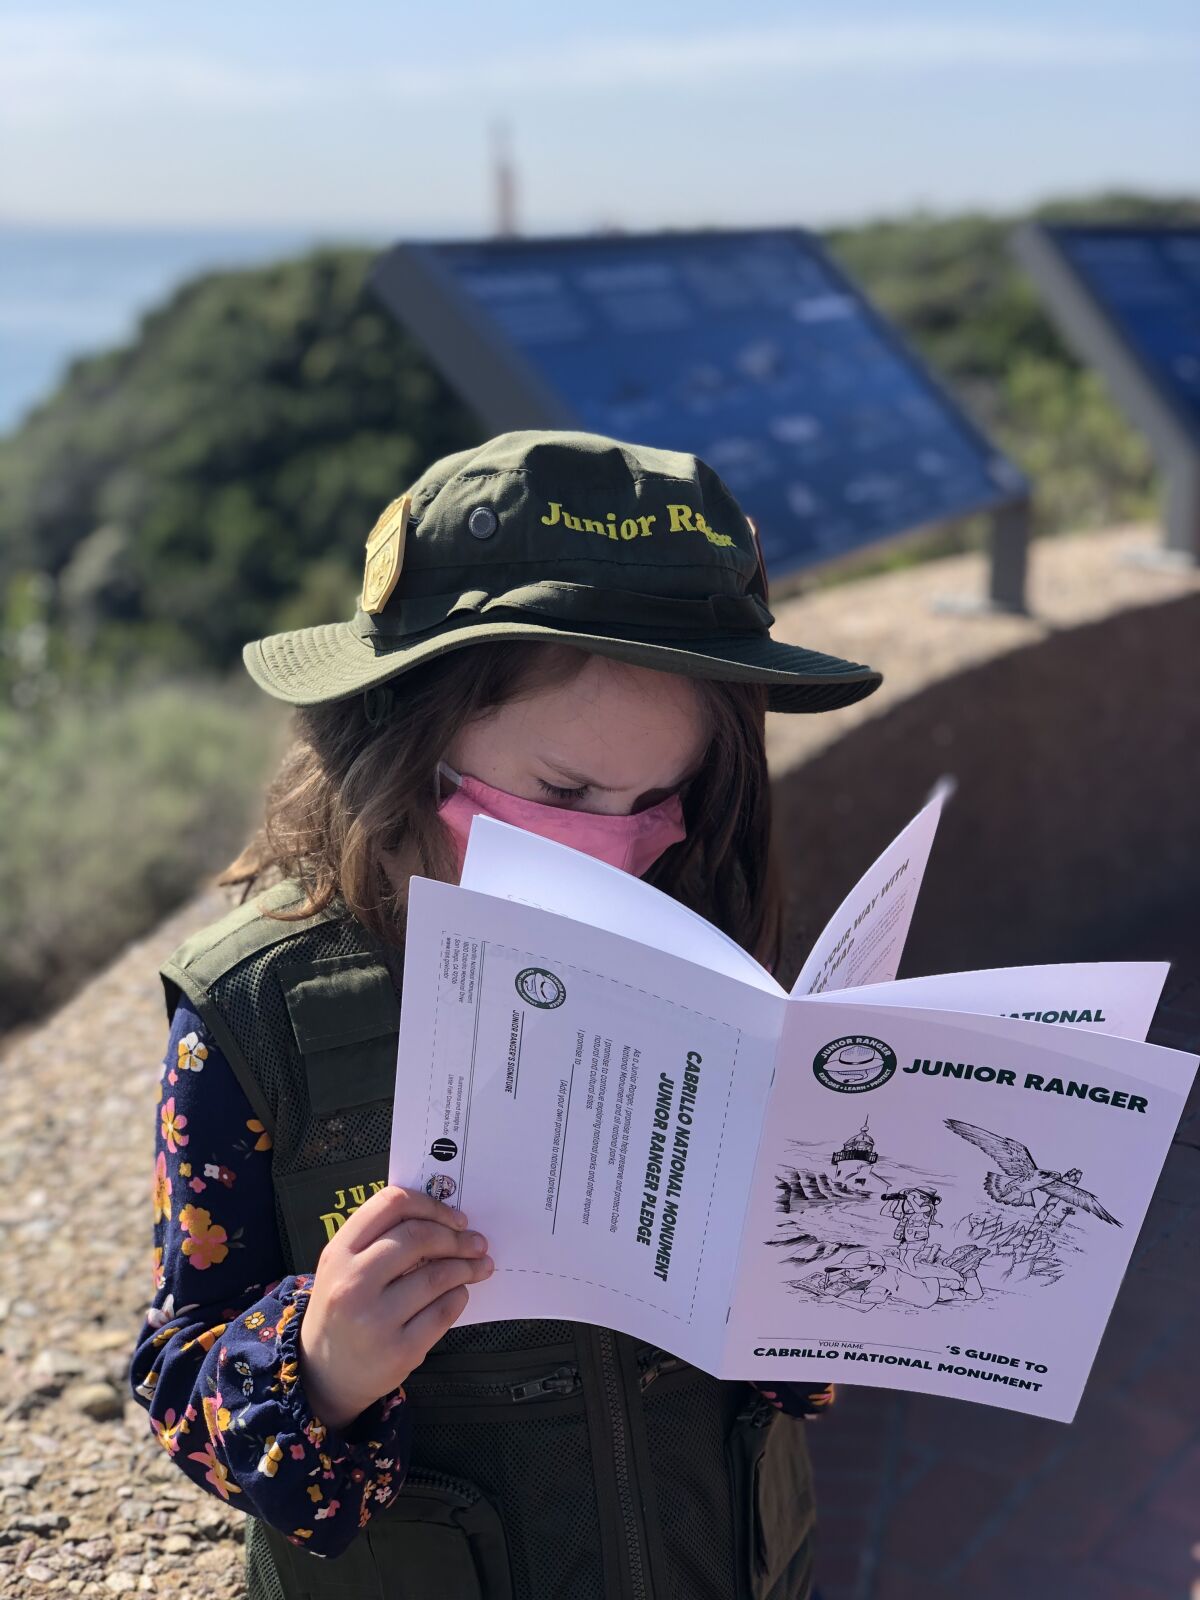 The junior ranger program is among the youth projects funded by the Cabrillo National Monument Foundation.